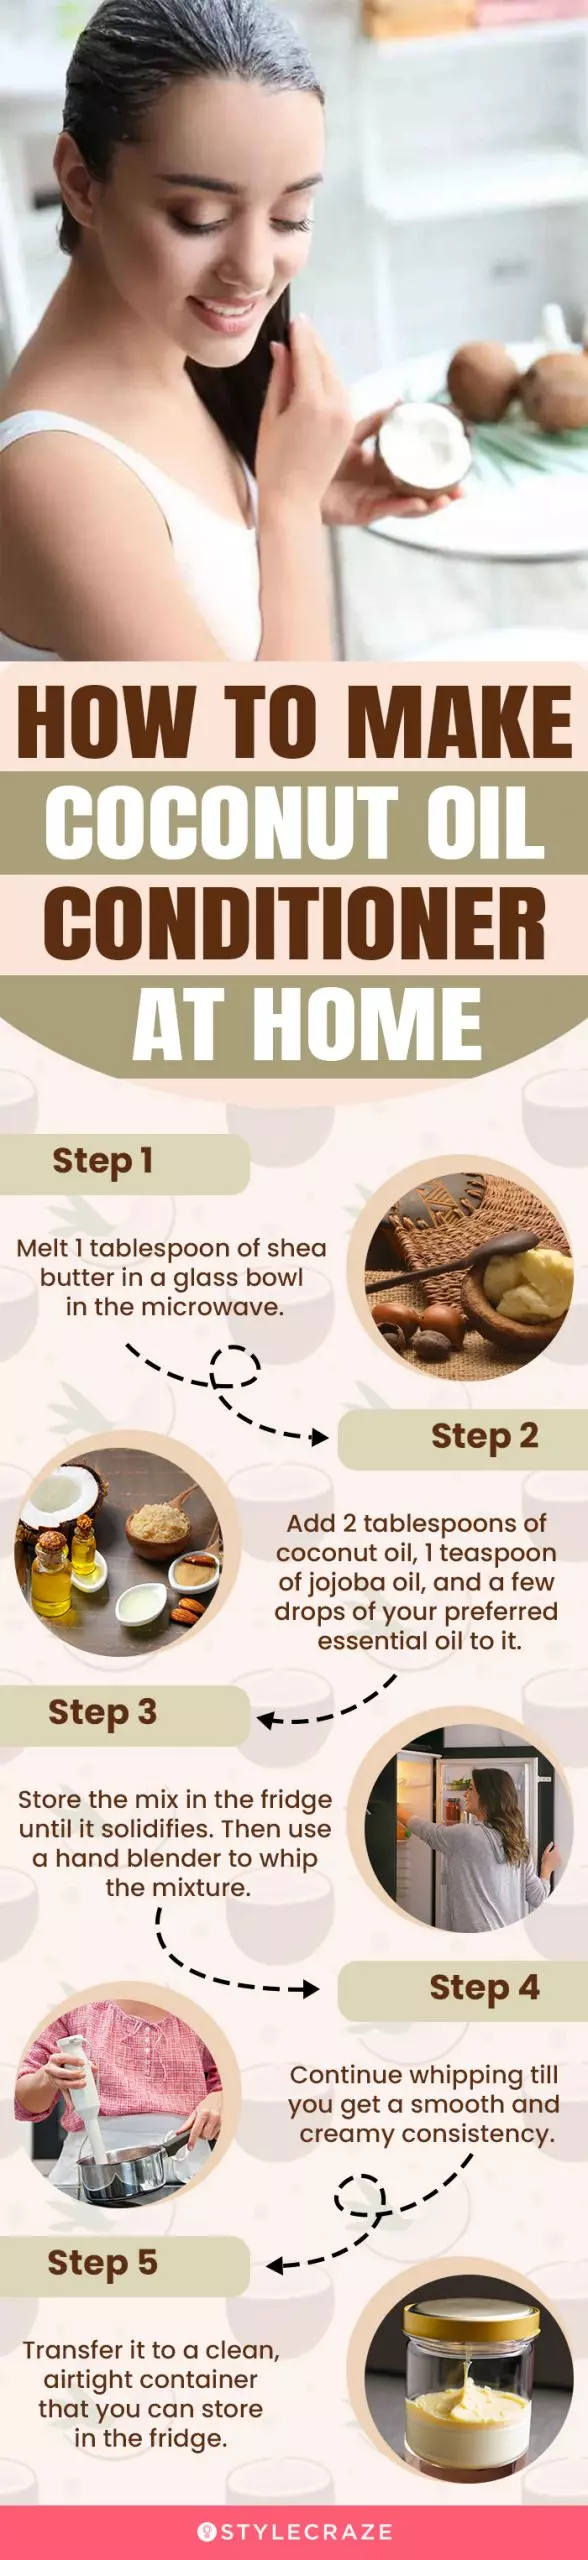 how to make coconut oil conditioner at home (infographic)